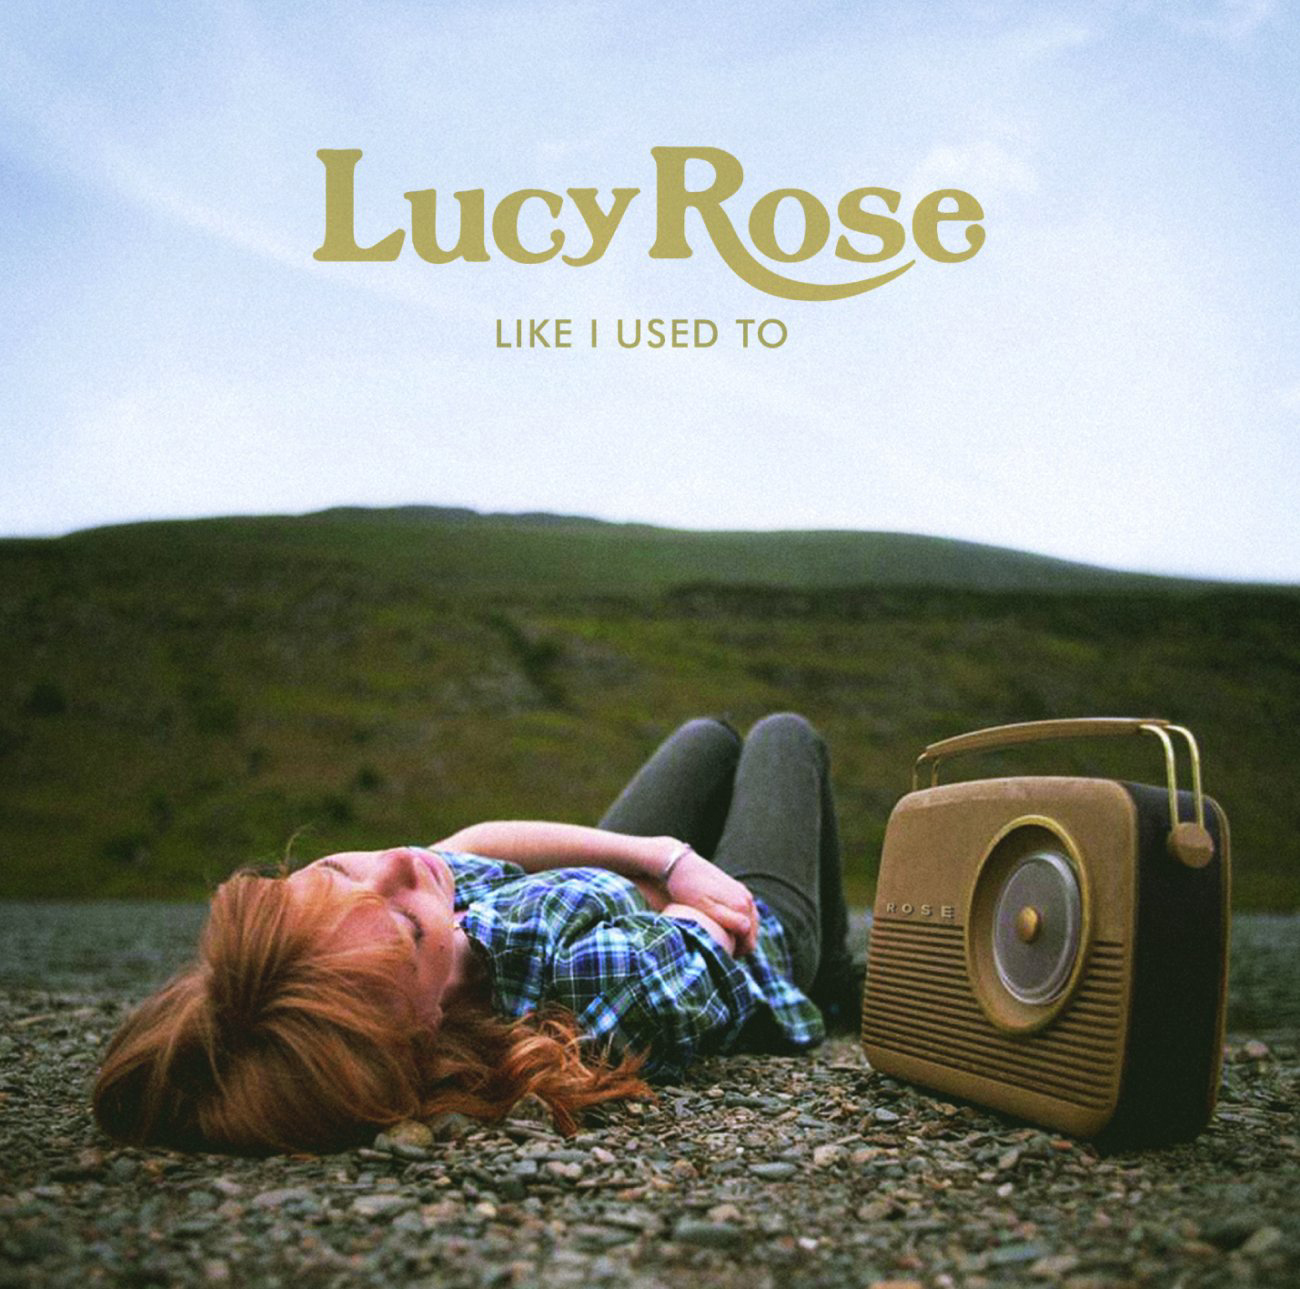 Lucy Rose - "Like I Used To"